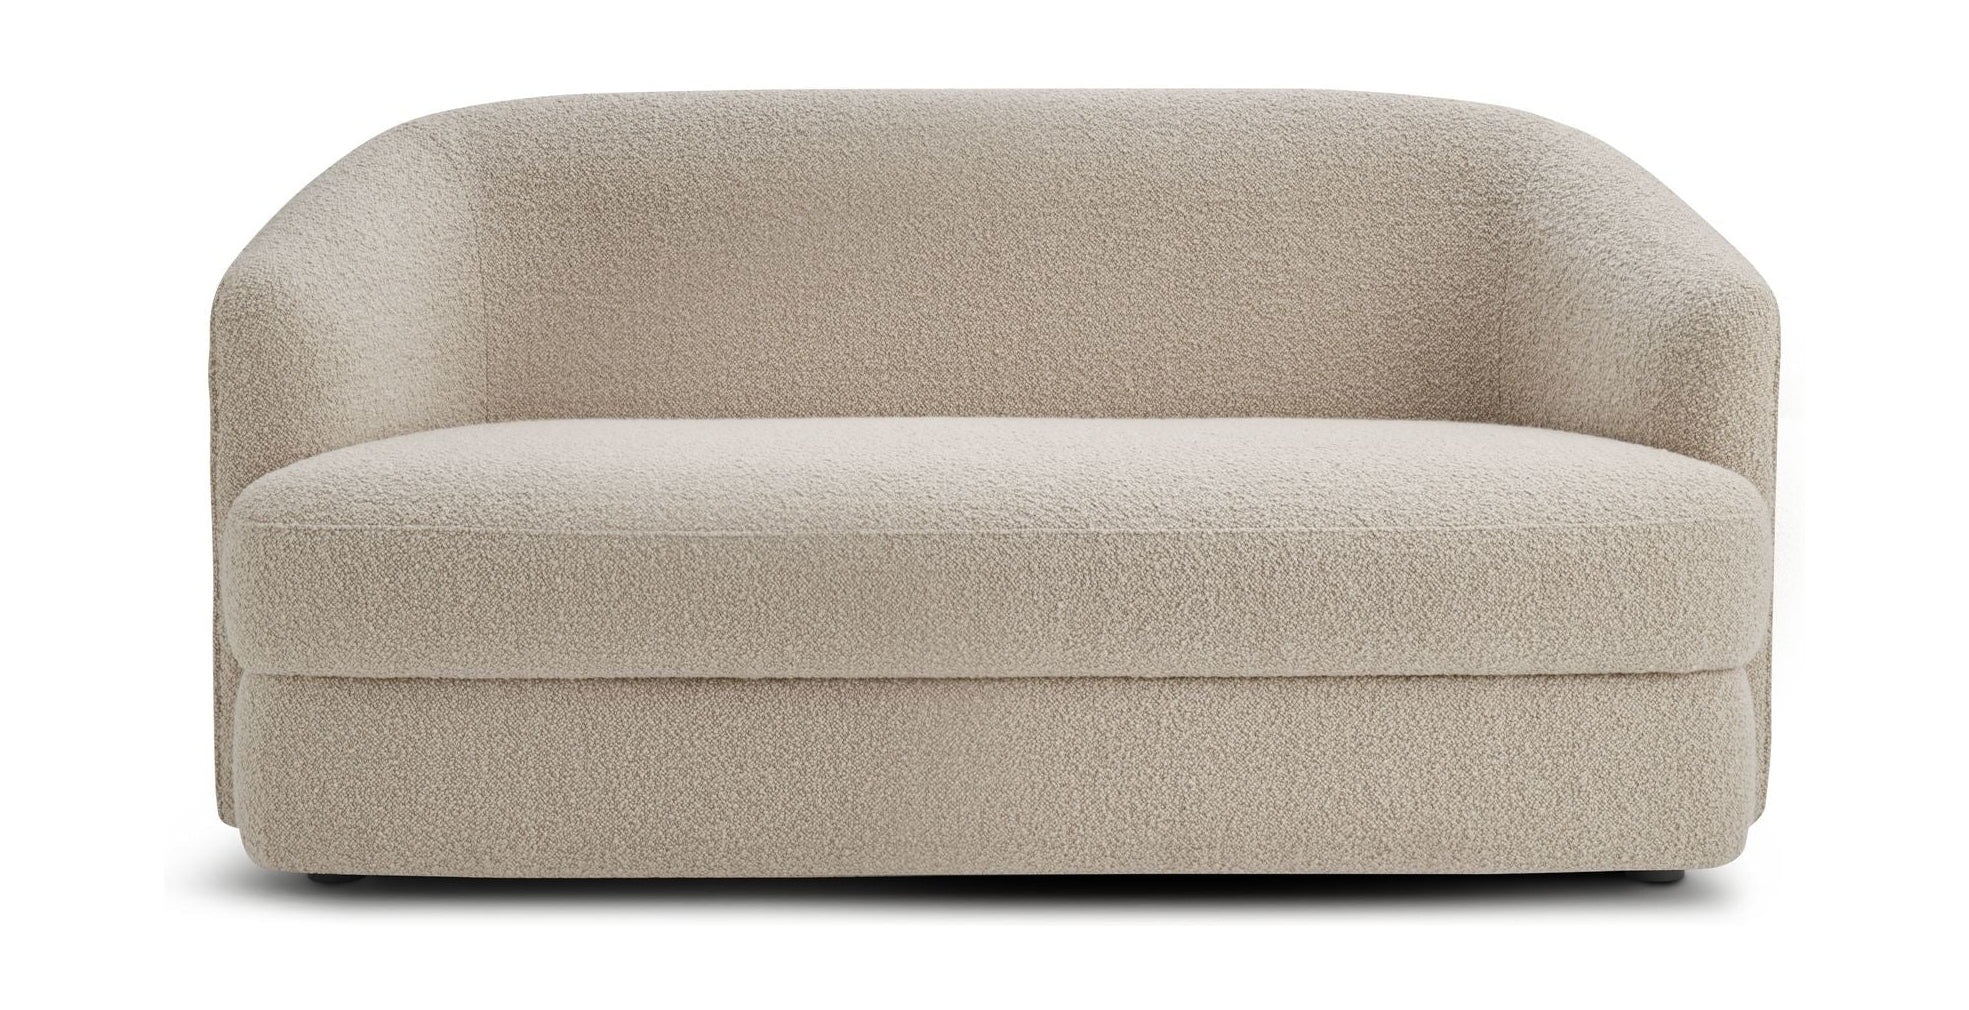 New Works Covent Sofa 2 Seater, Duna 003